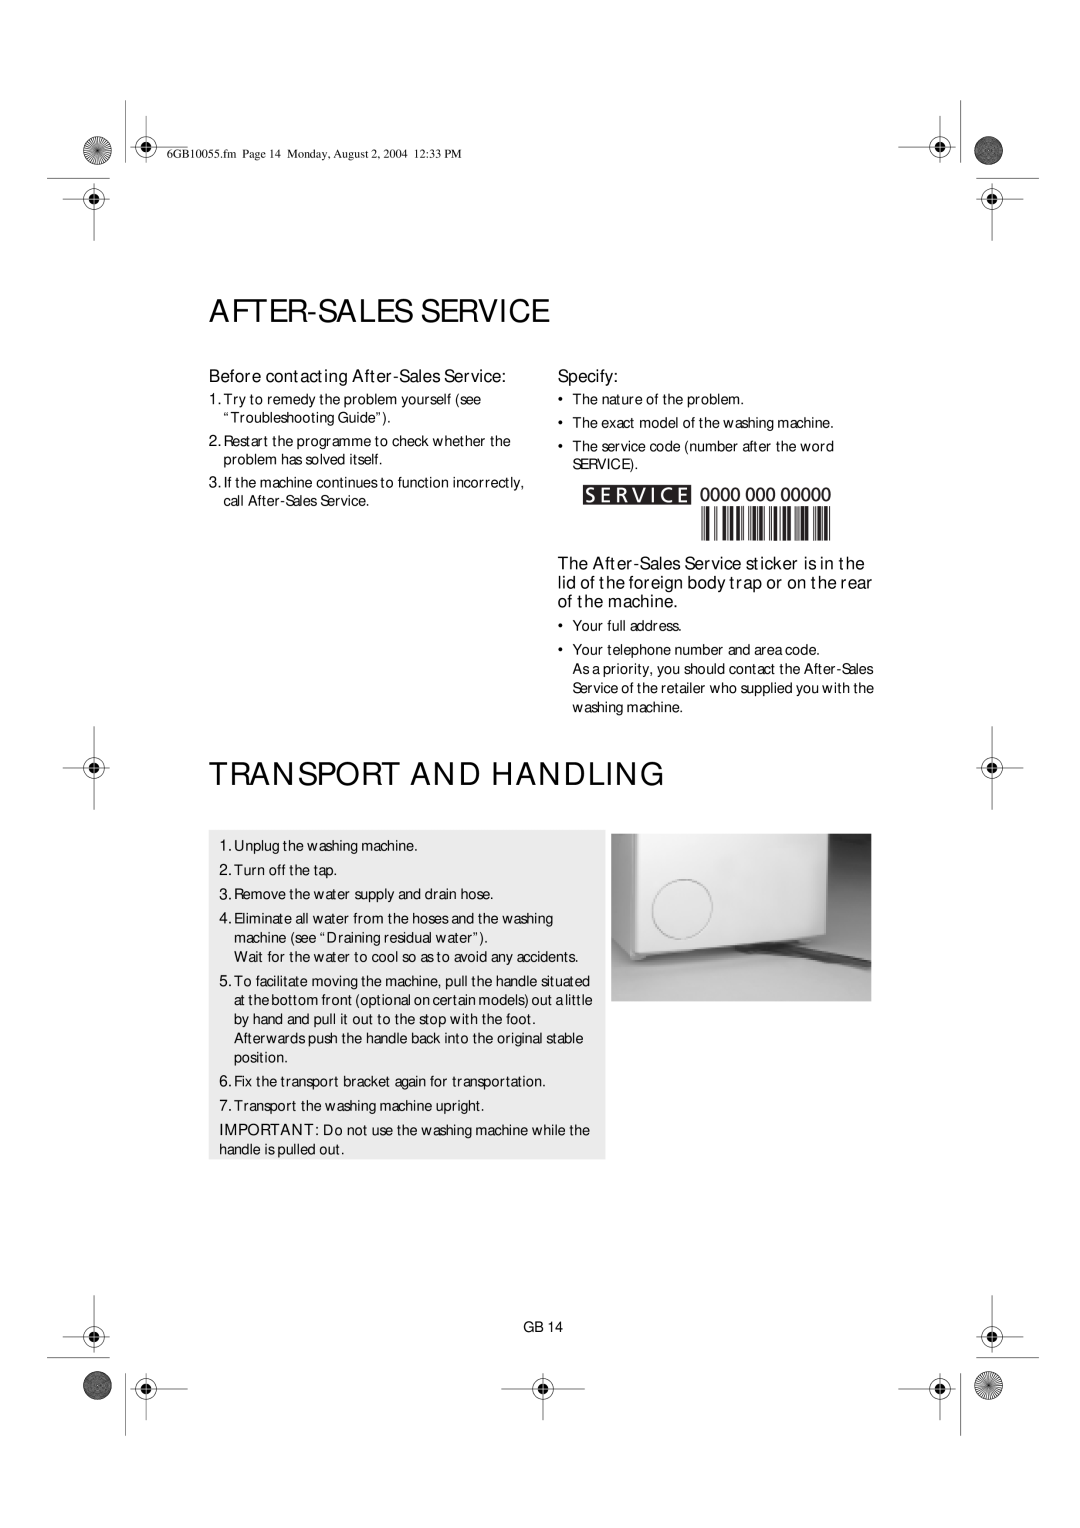 Smeg S600TL manual Transport And Handling, Before contacting After-Sales Service, Specify 